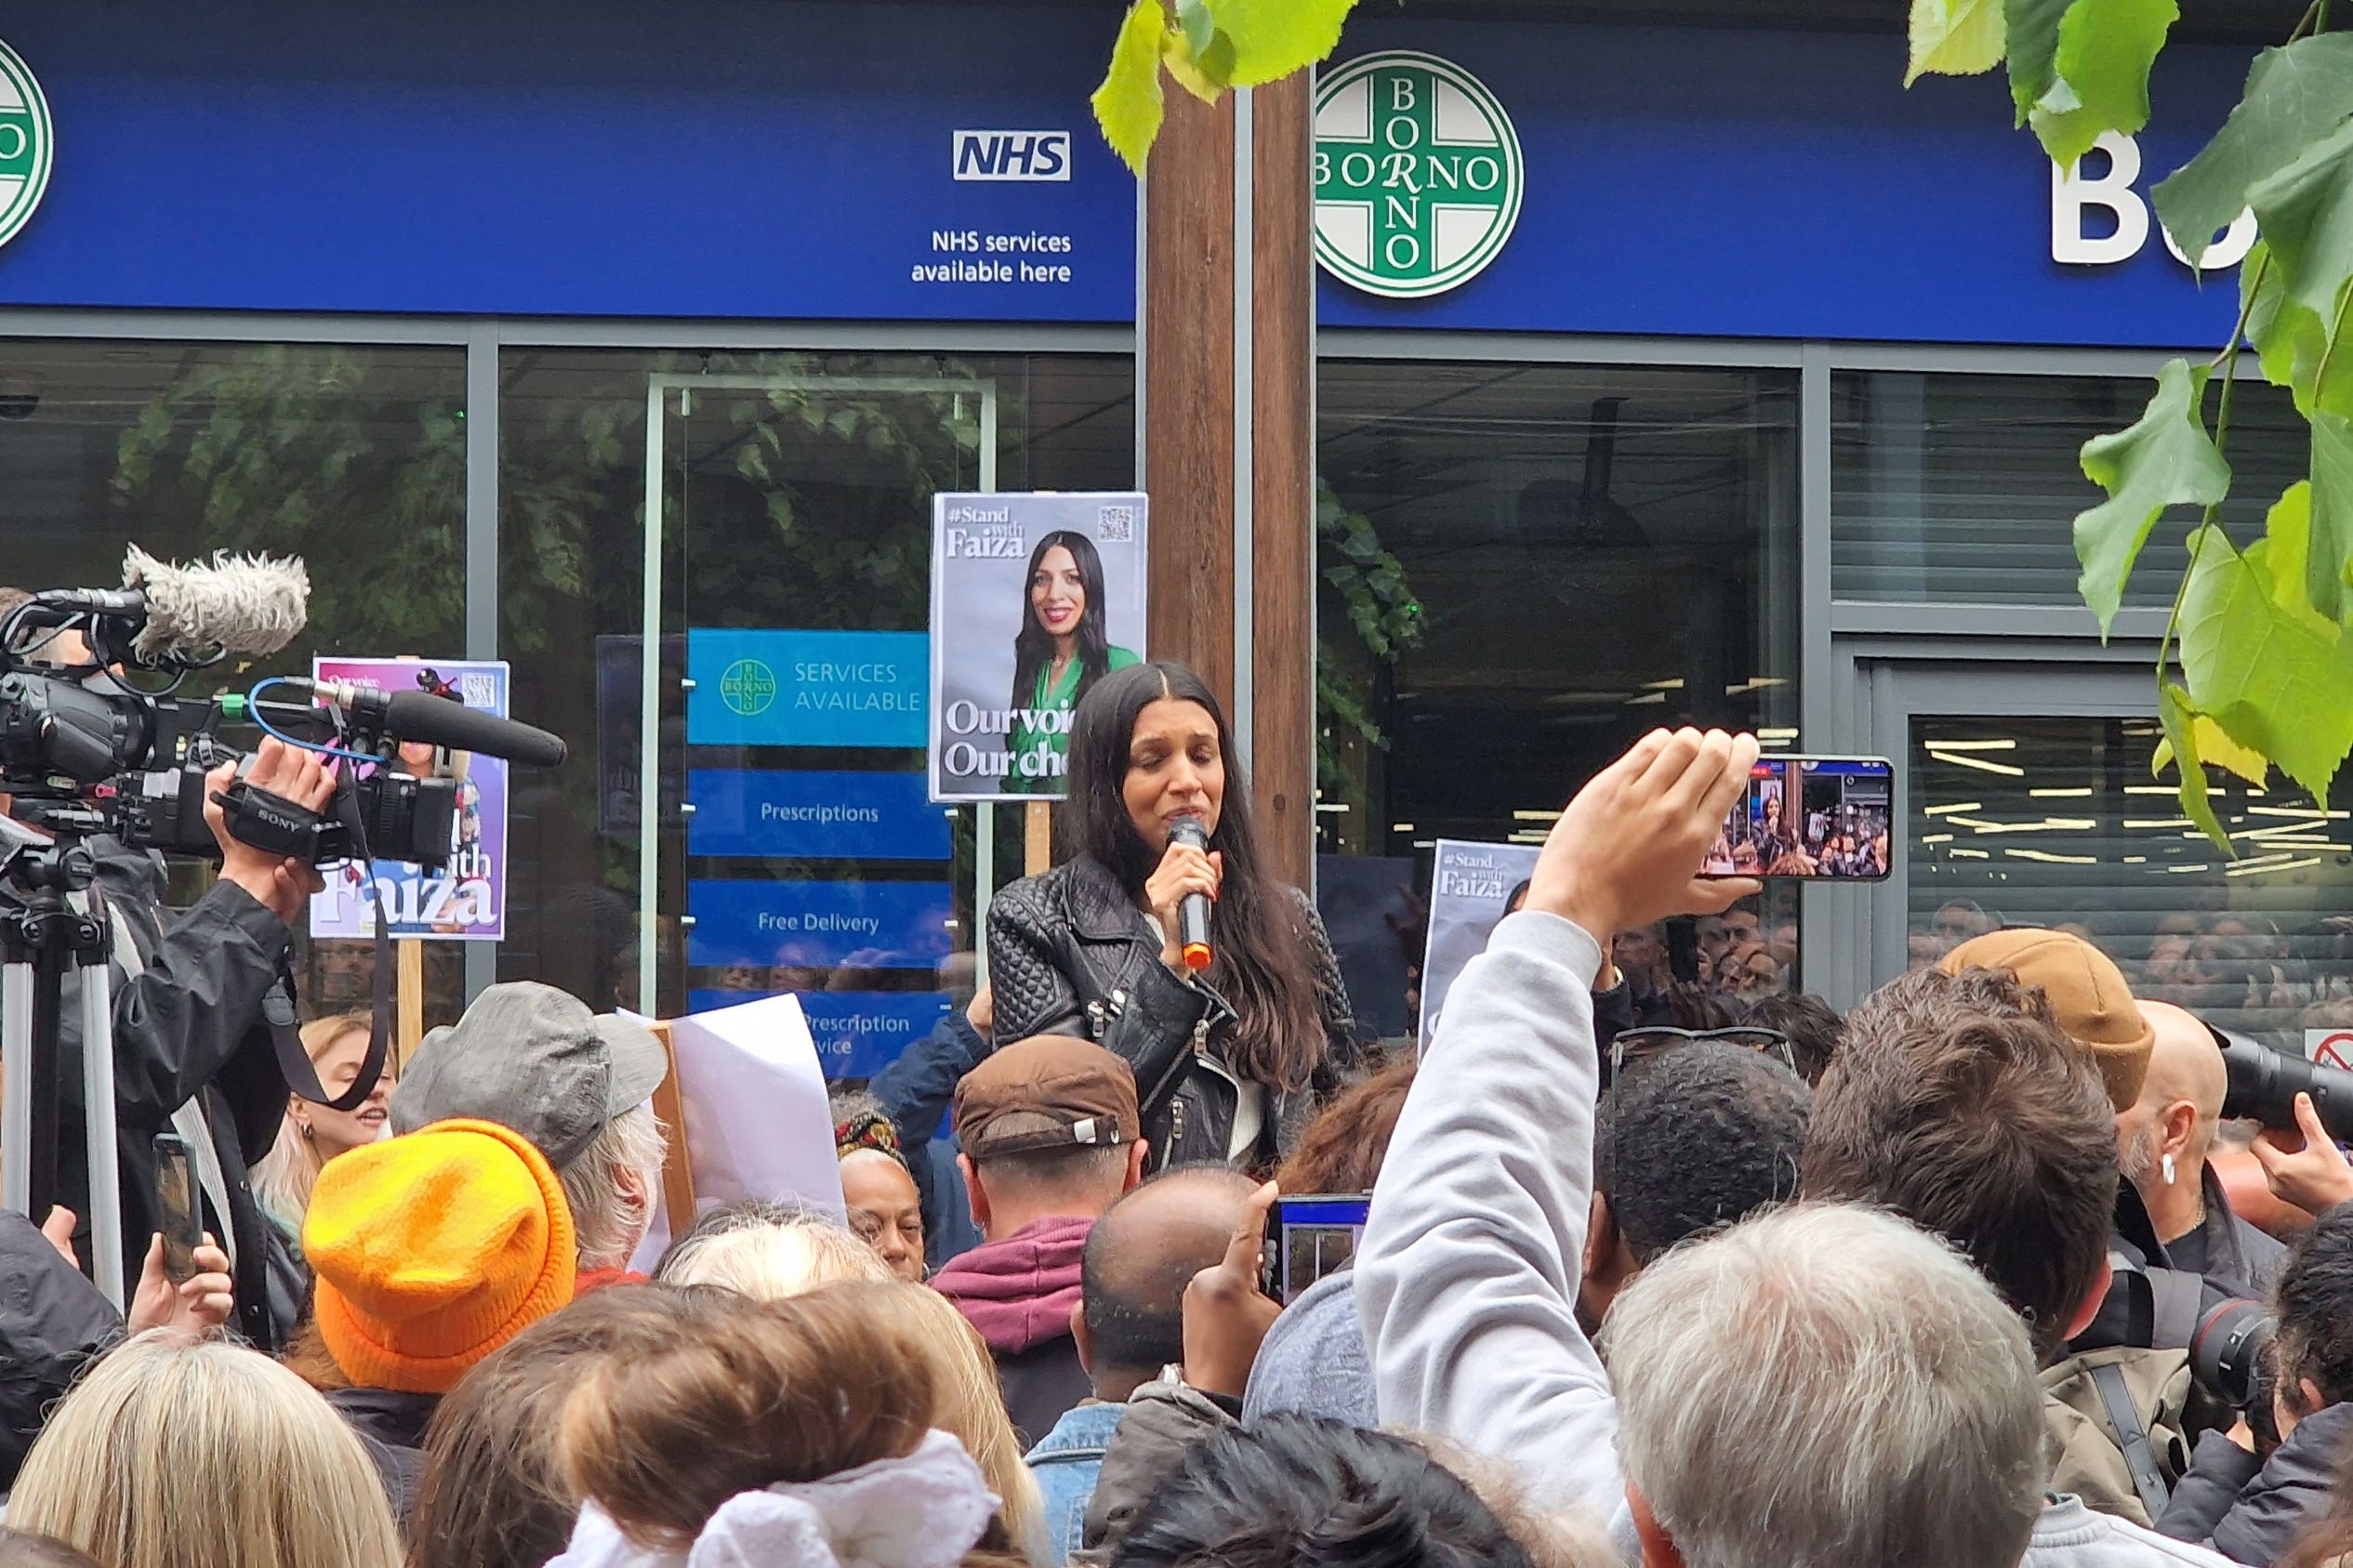 Former Labour candidate Faiza Shaheen addresses supporters (Piers Mucklejohn/PA)